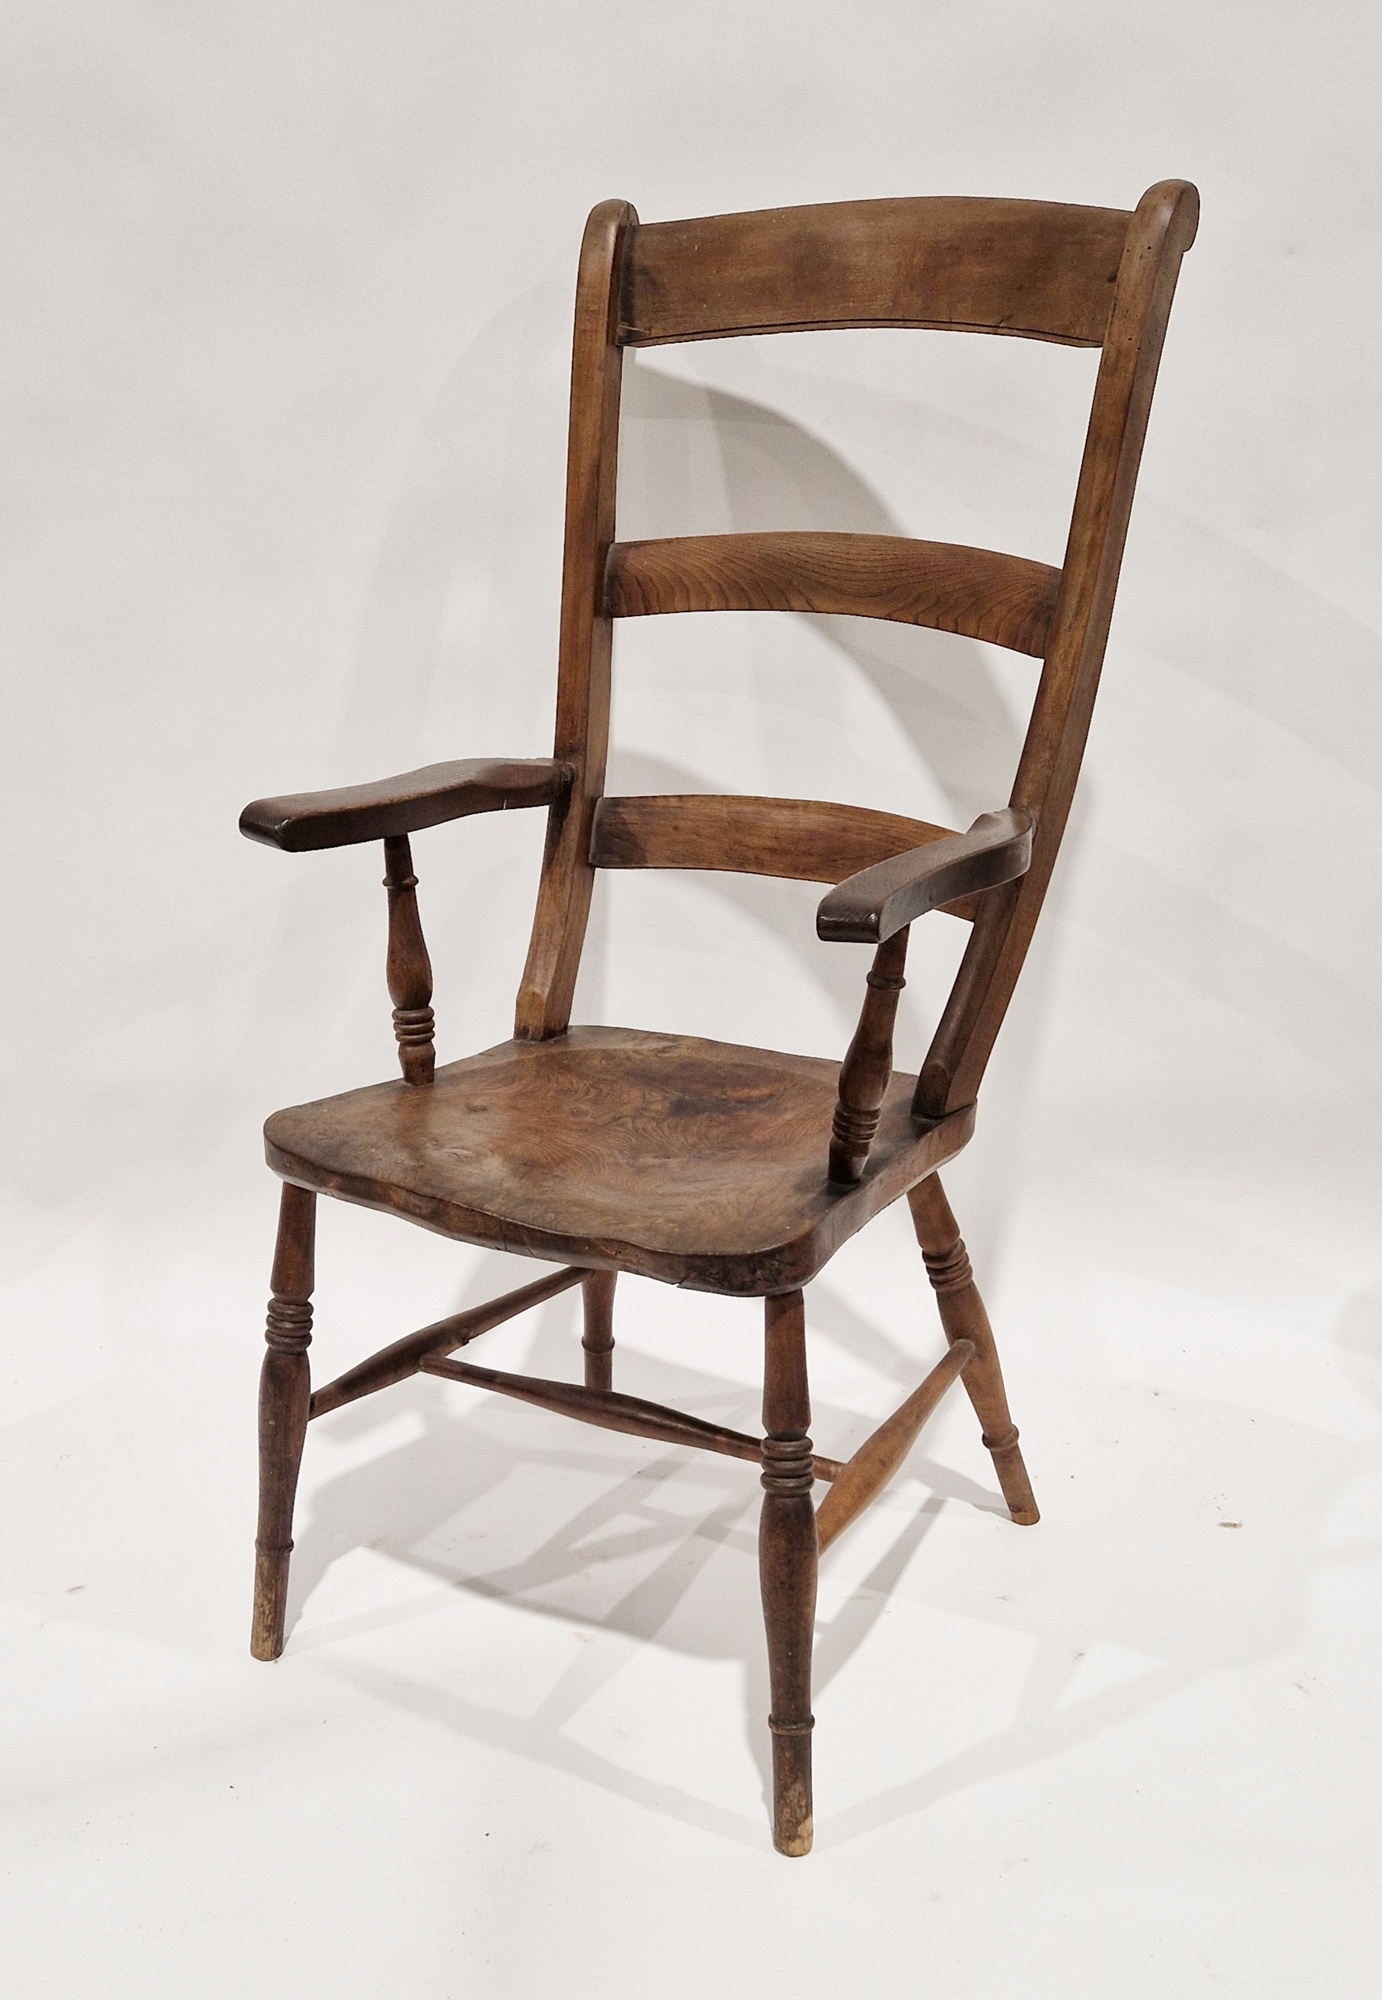 Late 19th/early 20th century wooden armchair on turned legs, 108cm high